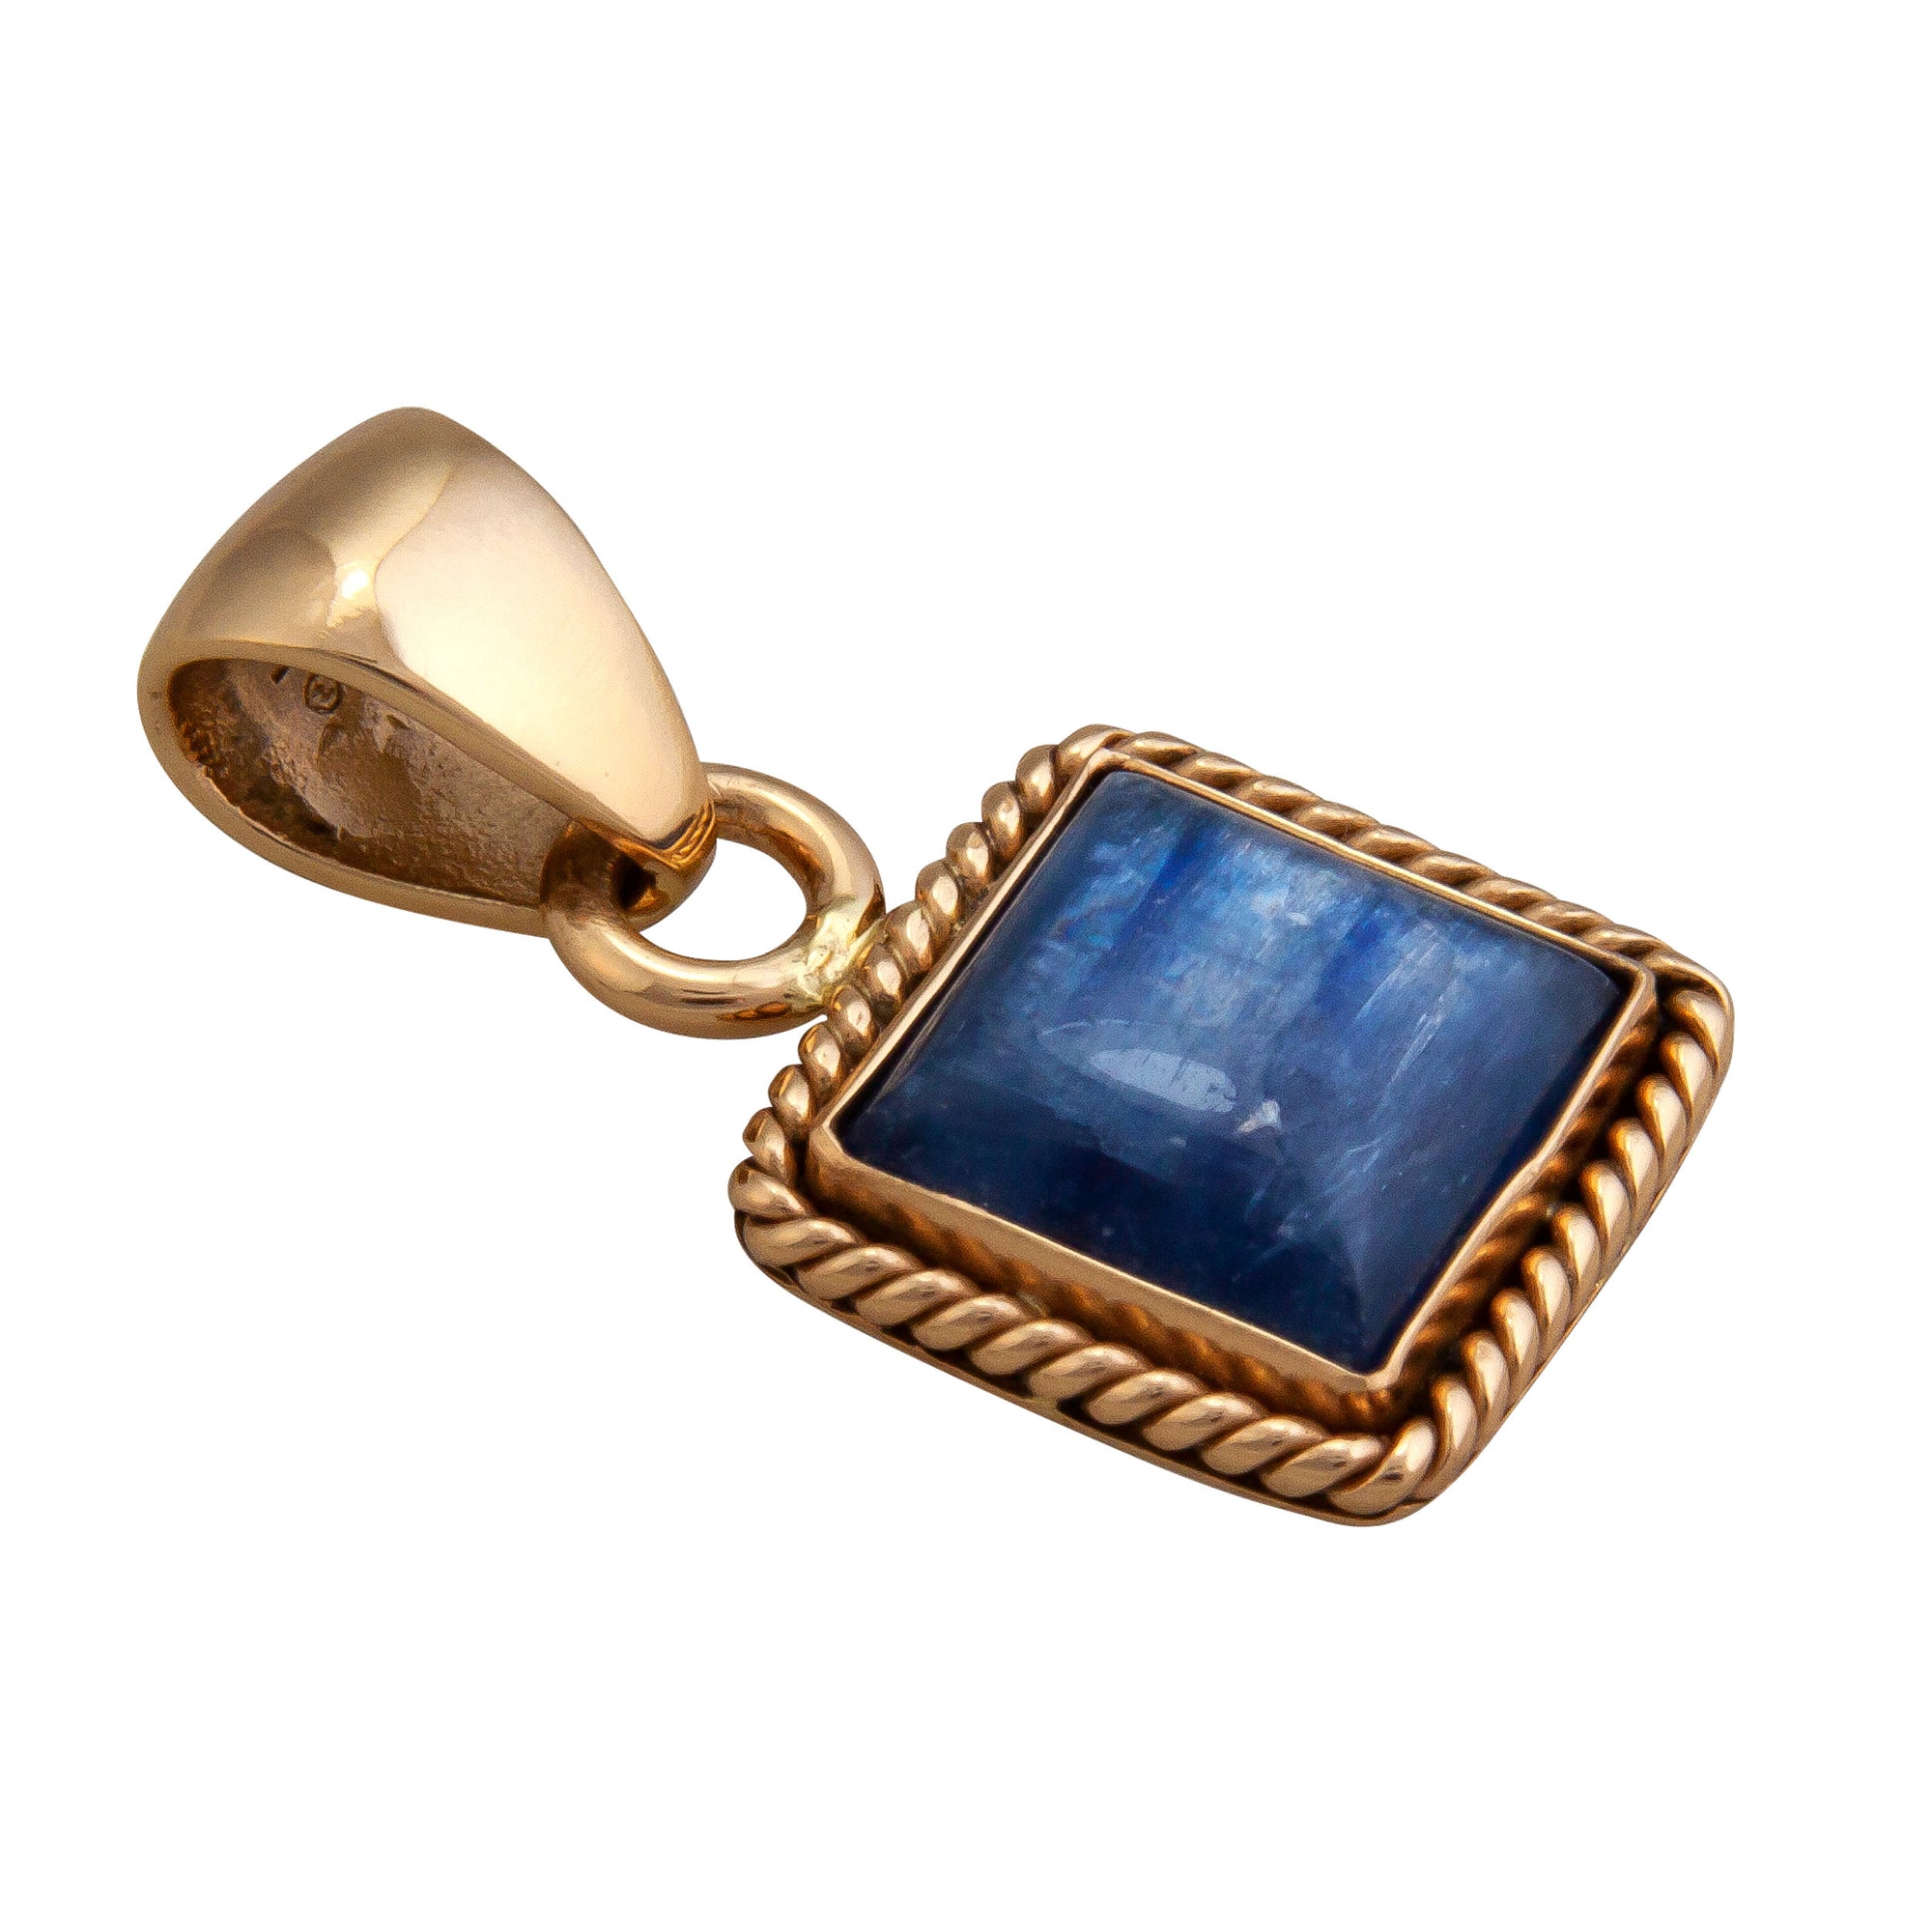 Charles Albert Jewelry - Alchemia Kyanite Square Pendant with Rope Edge - Side View